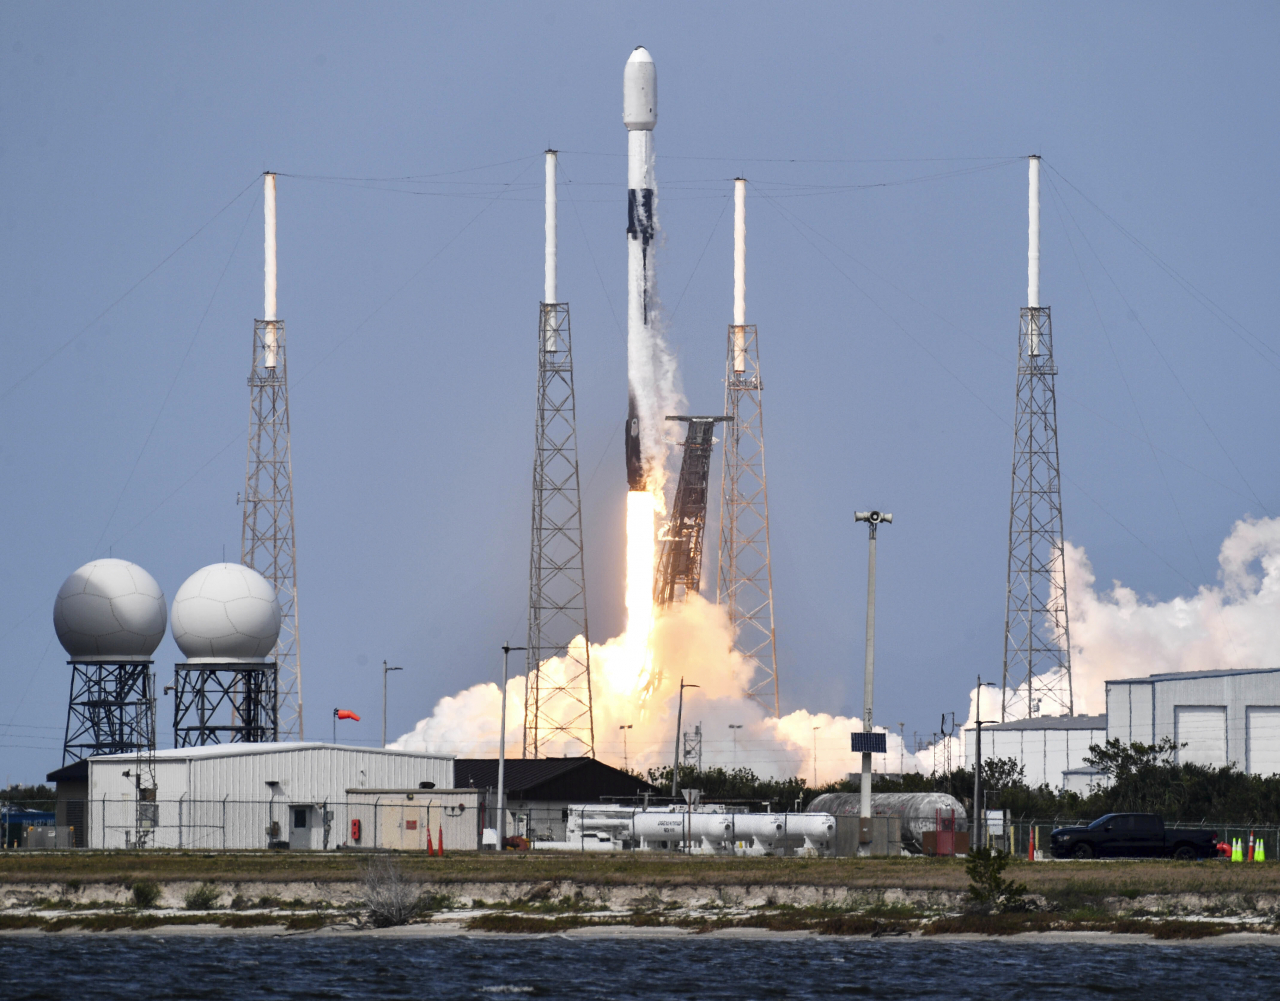 A SpaceX Falcon 9 rocket lifts off from Cape Canaveral Space Force Station in Florida on March 29. The rocket is carrying 56 Starlink satellites. (AP-Yonhap)